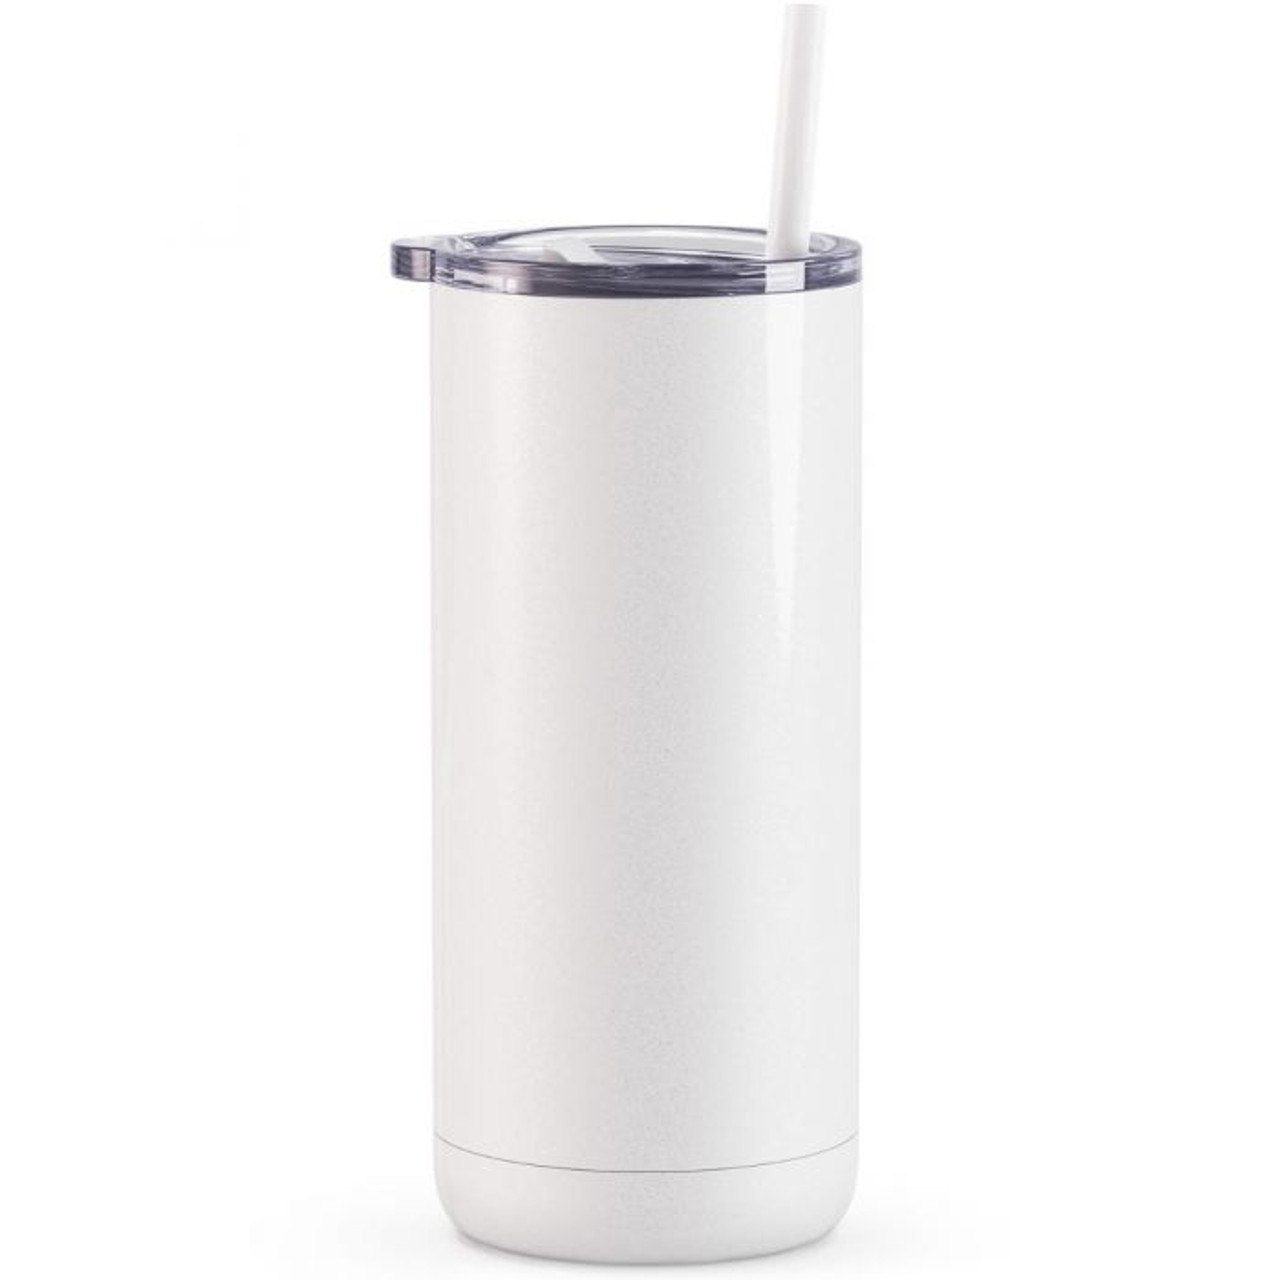 Design Your Own Stainless Steel Skinny Tumbler